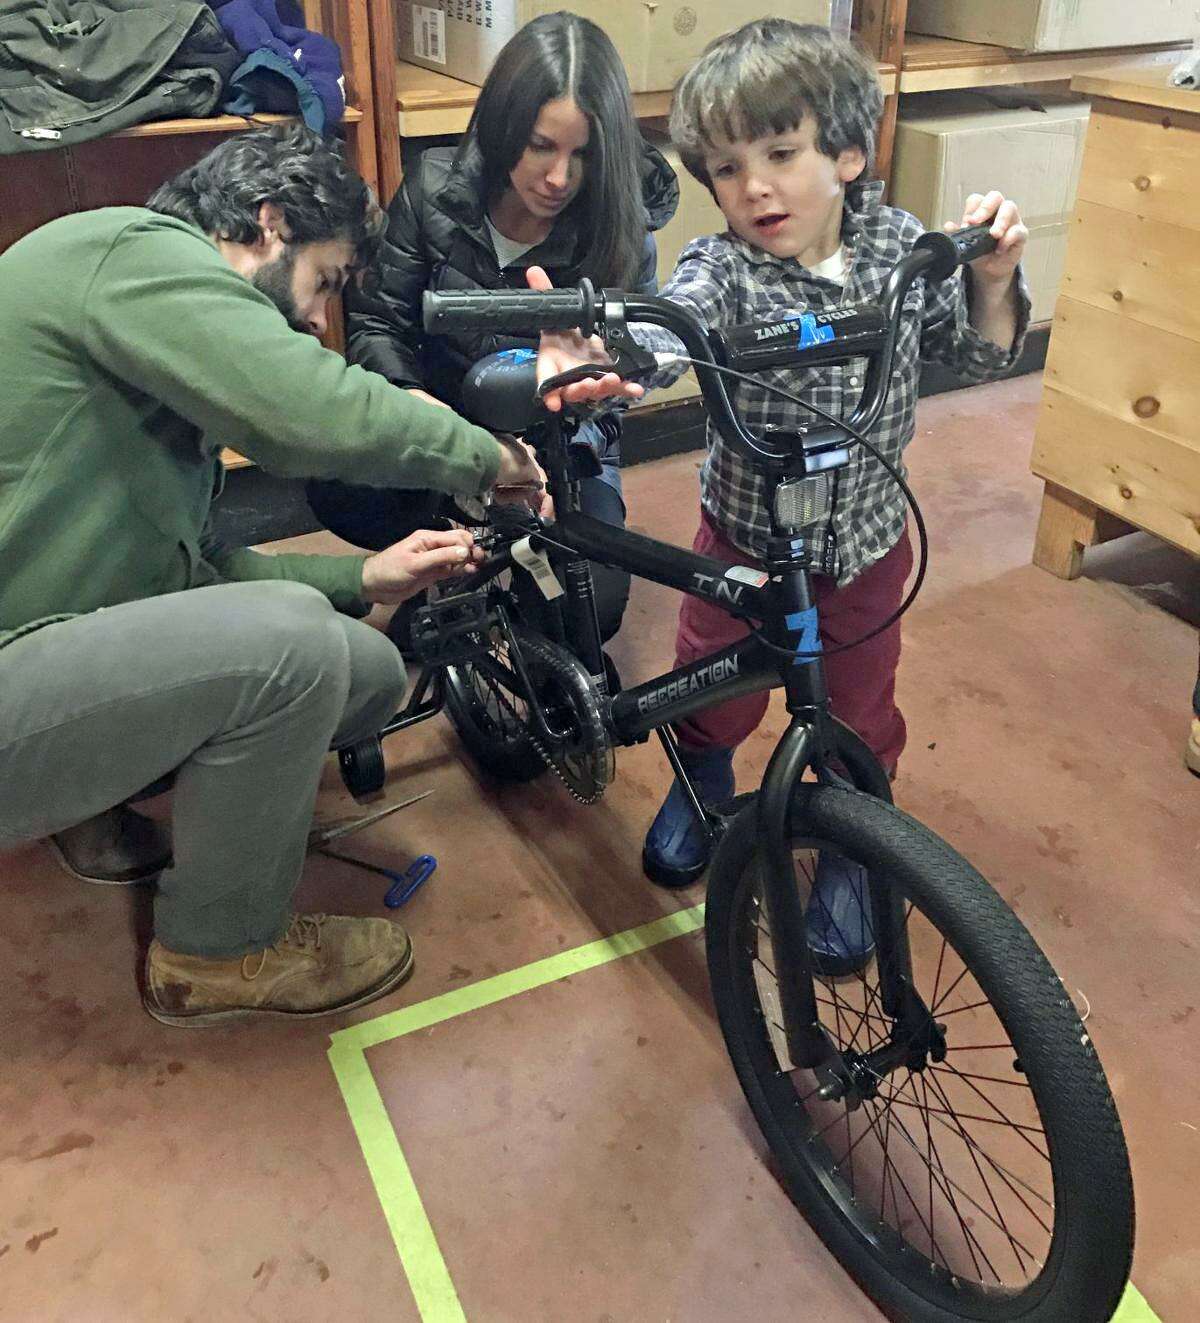 Guilford residents Tom and Maggie Ferrell, with the assistance of their 4-year-old son Bruen, assemble a bike during the 2017 Wishing Wheels Holiday Bike Drive.